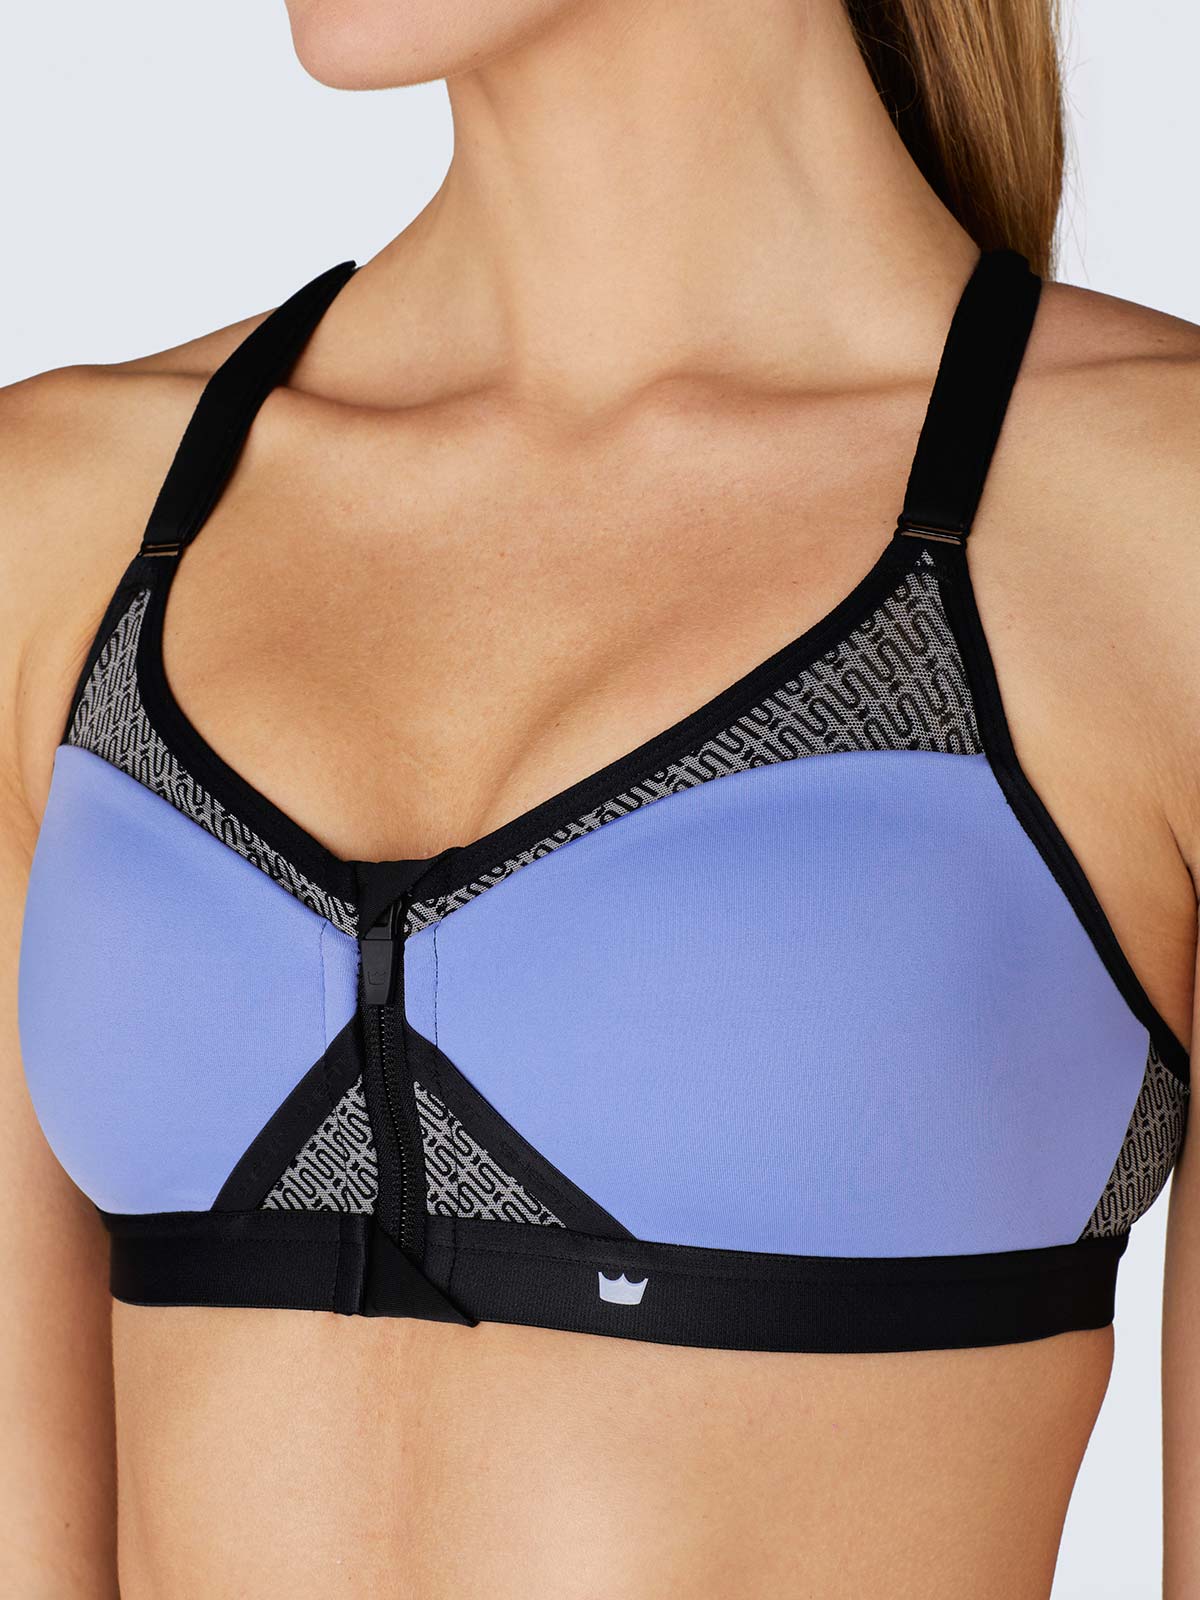 the cutest & most supportive sports bras ive ever owned! 👏🏾🔥 @SHEFI